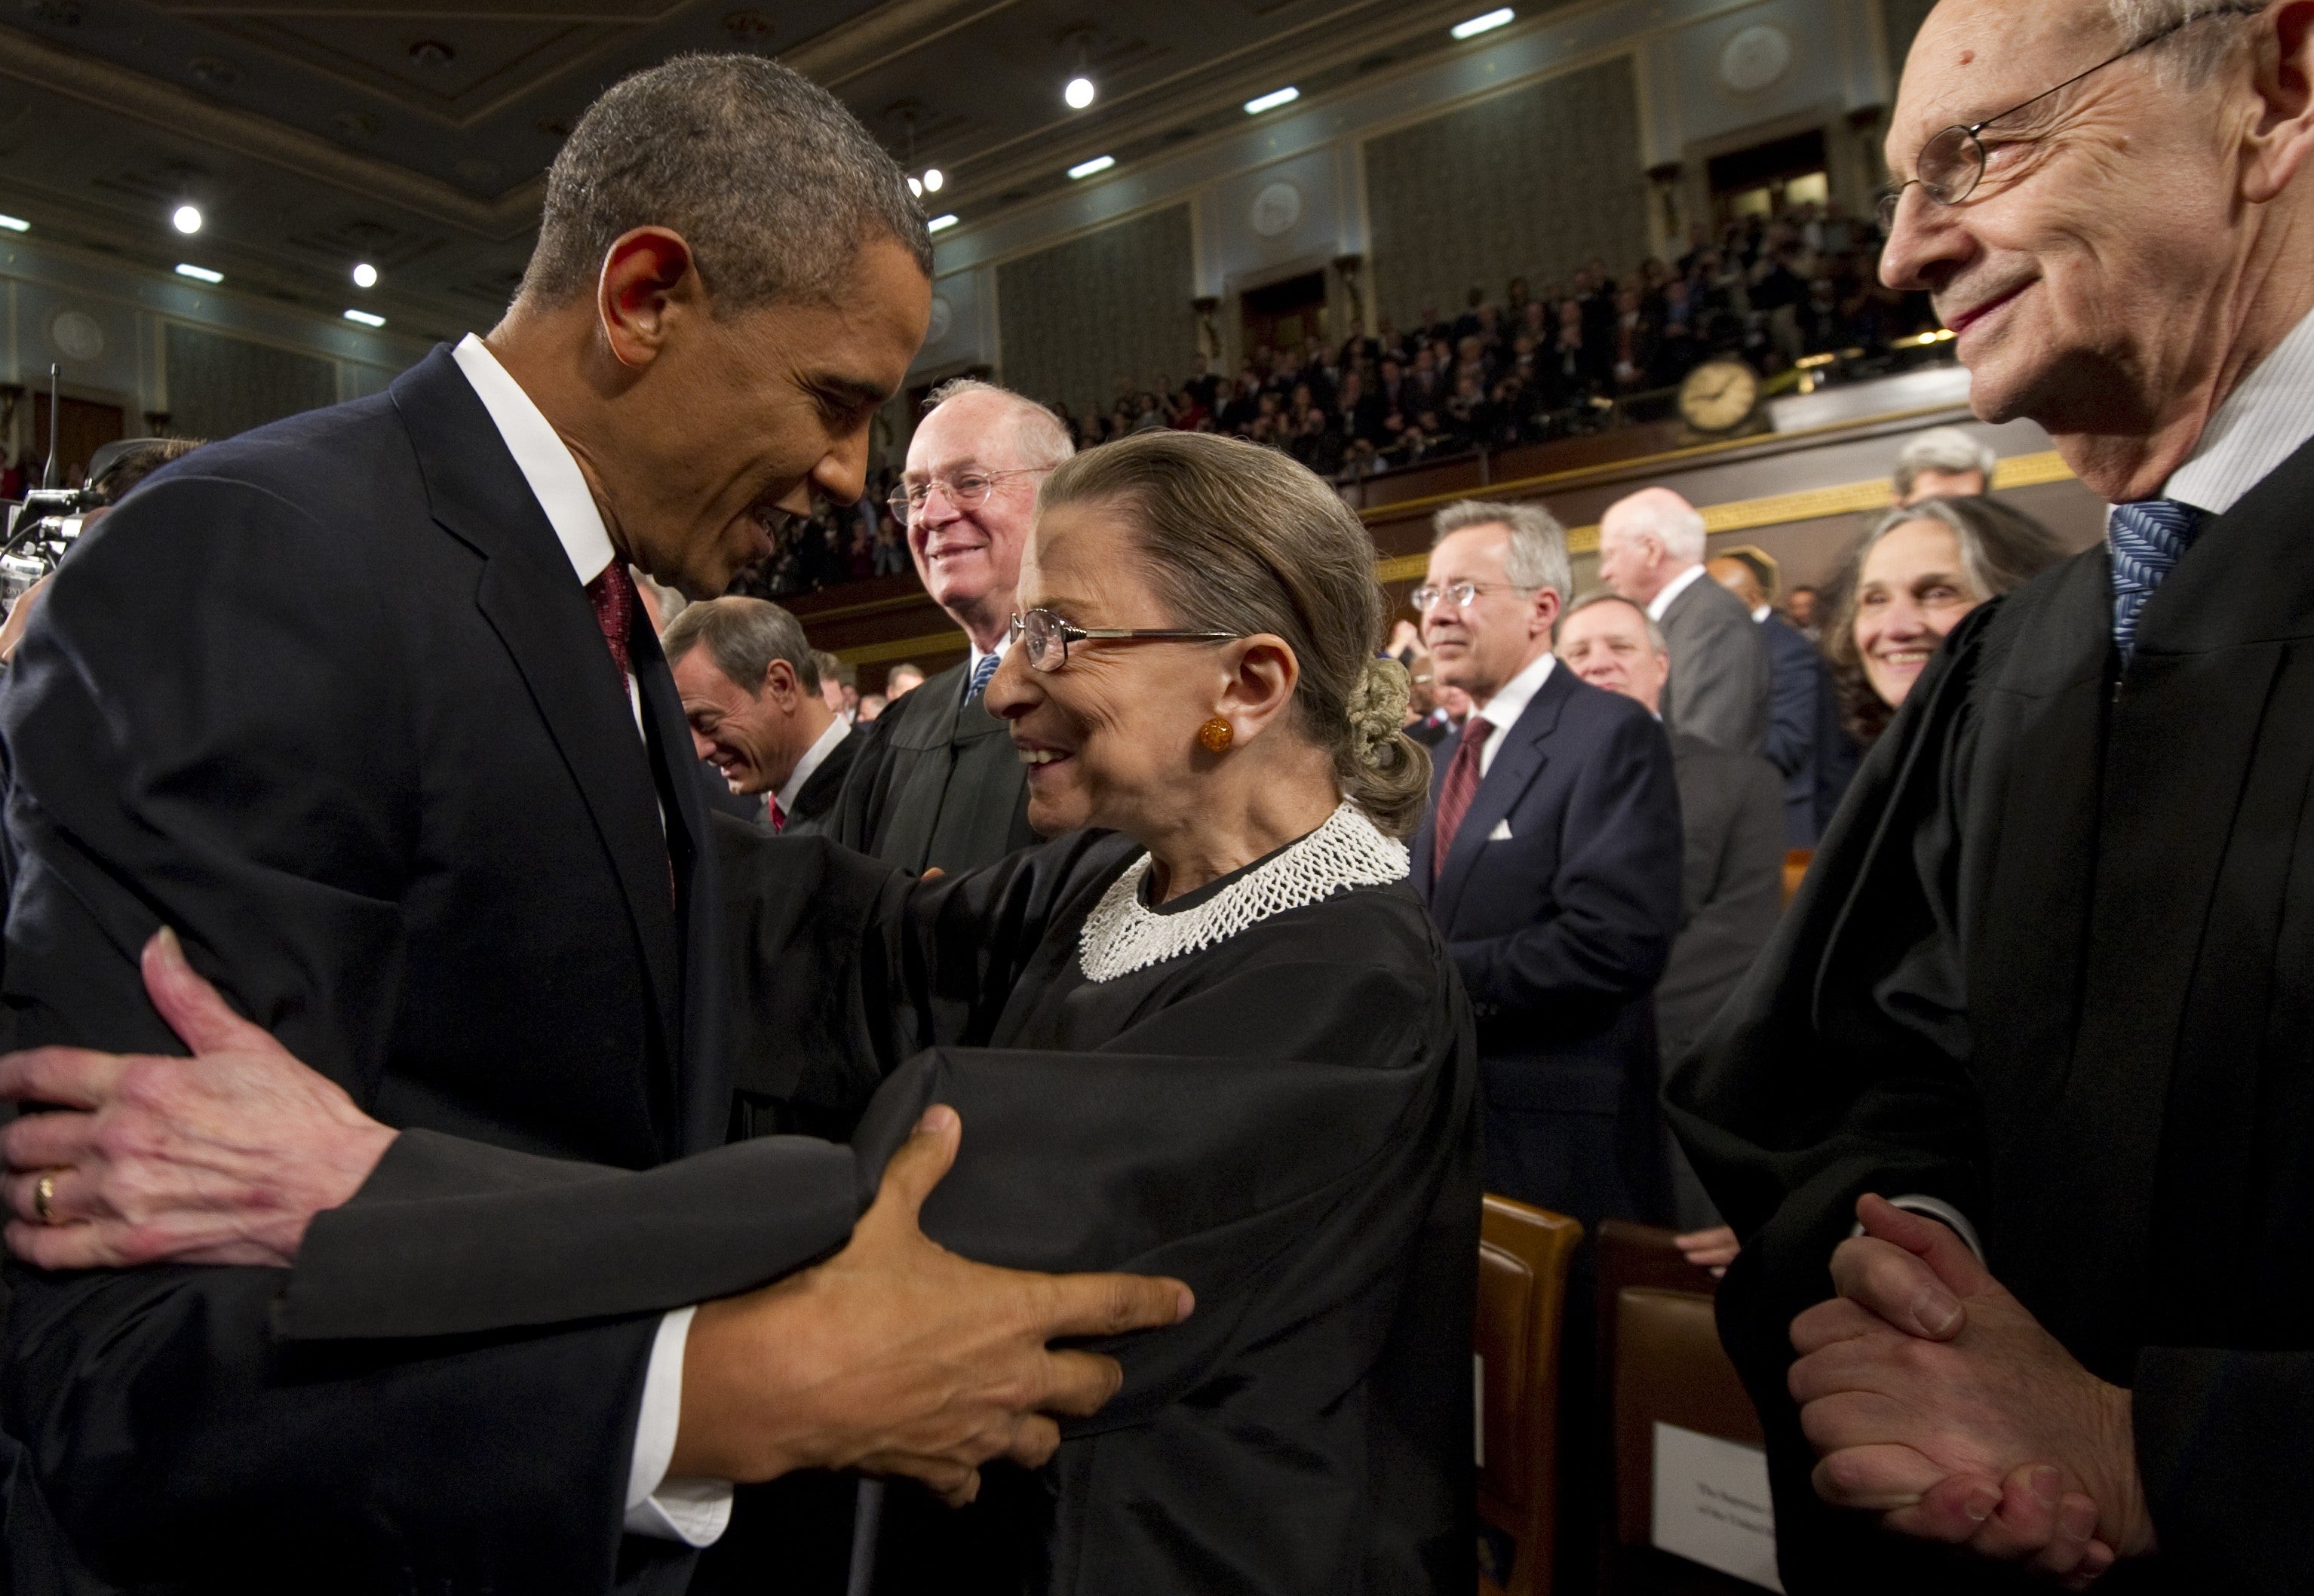 Justice Ginsburg greets Barack Obama before his State of the Union address in 2012